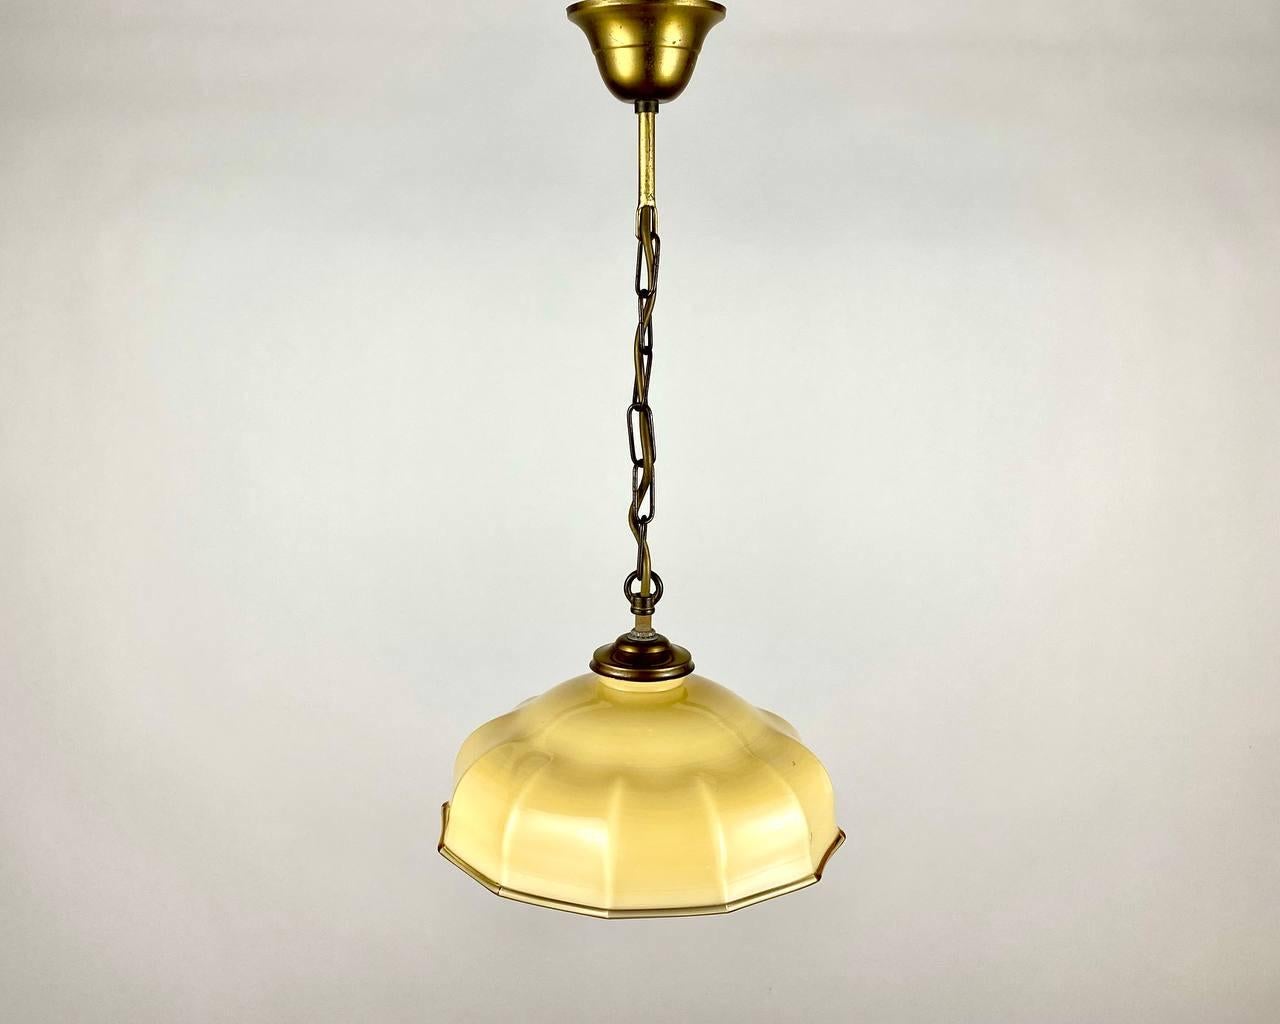 Yellow glass hanging lamp with brass fixture from the 1960s.
The glass shade has a bit of the shape of an umbrella. 

Unusual vintage chandelier from France, 1960s'.

A golden wire is 